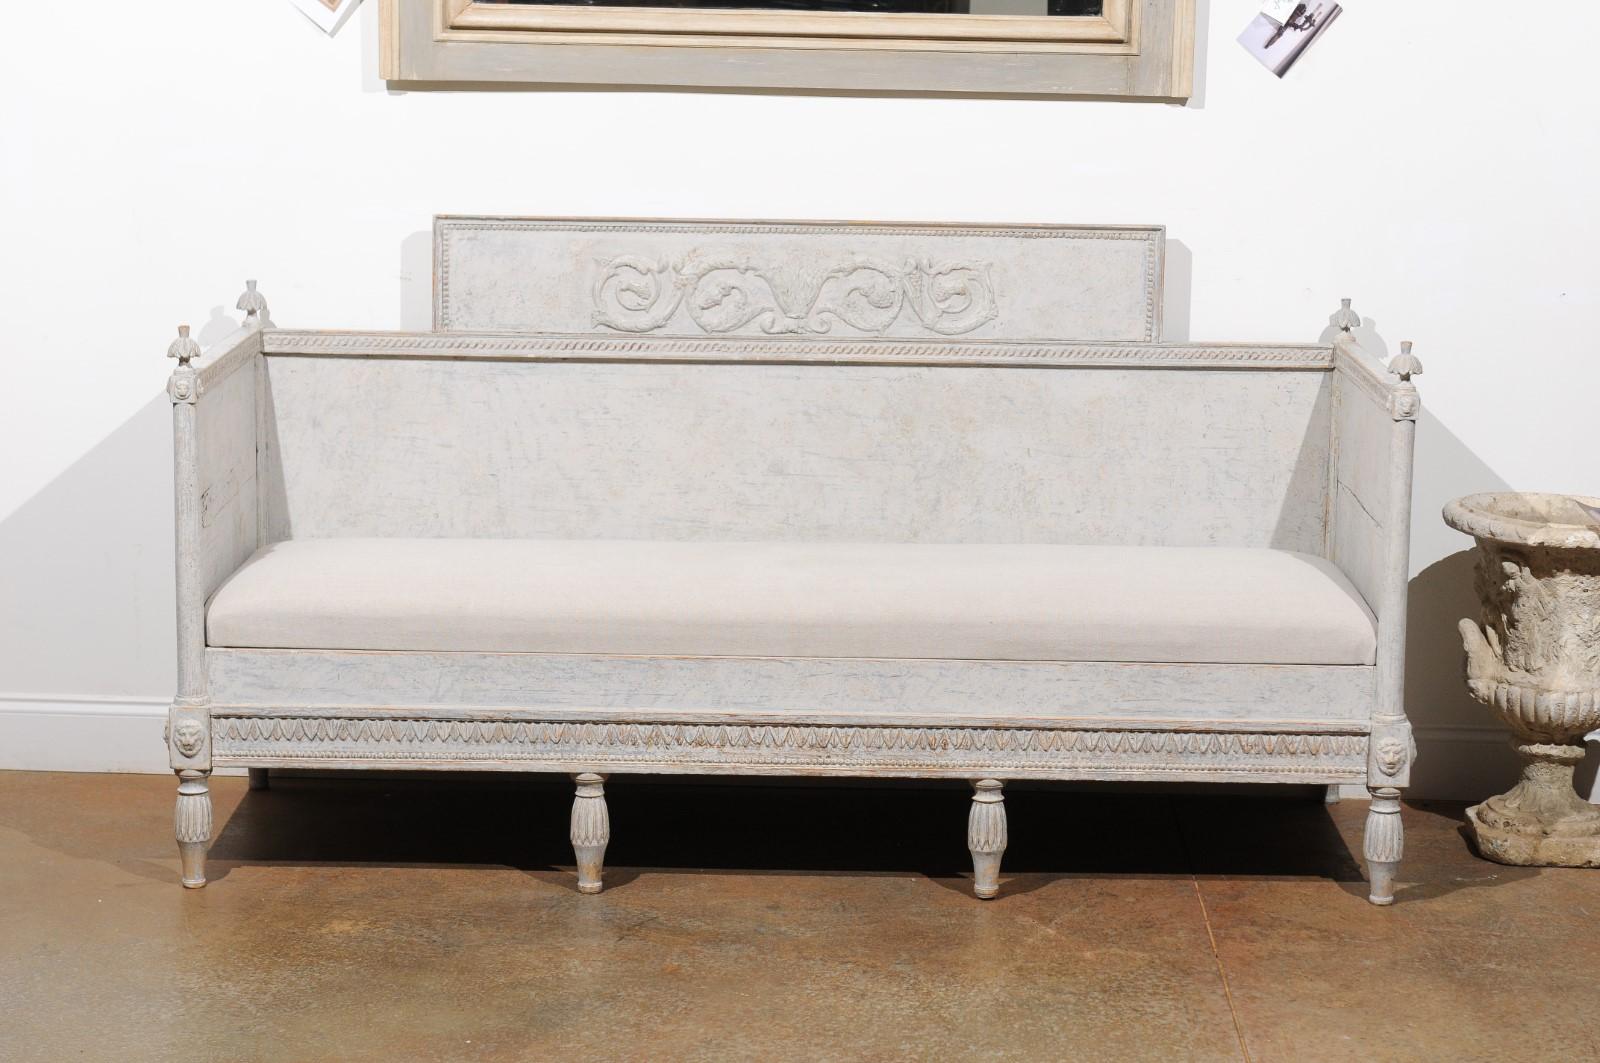 A Swedish neoclassical painted wood sofa bench from the early 19th century, with scrollwork design, lions, beads, waterleaf motifs and new upholstery. Born in the early years of the 19th century during the Gustavian era, this exquisite painted sofa